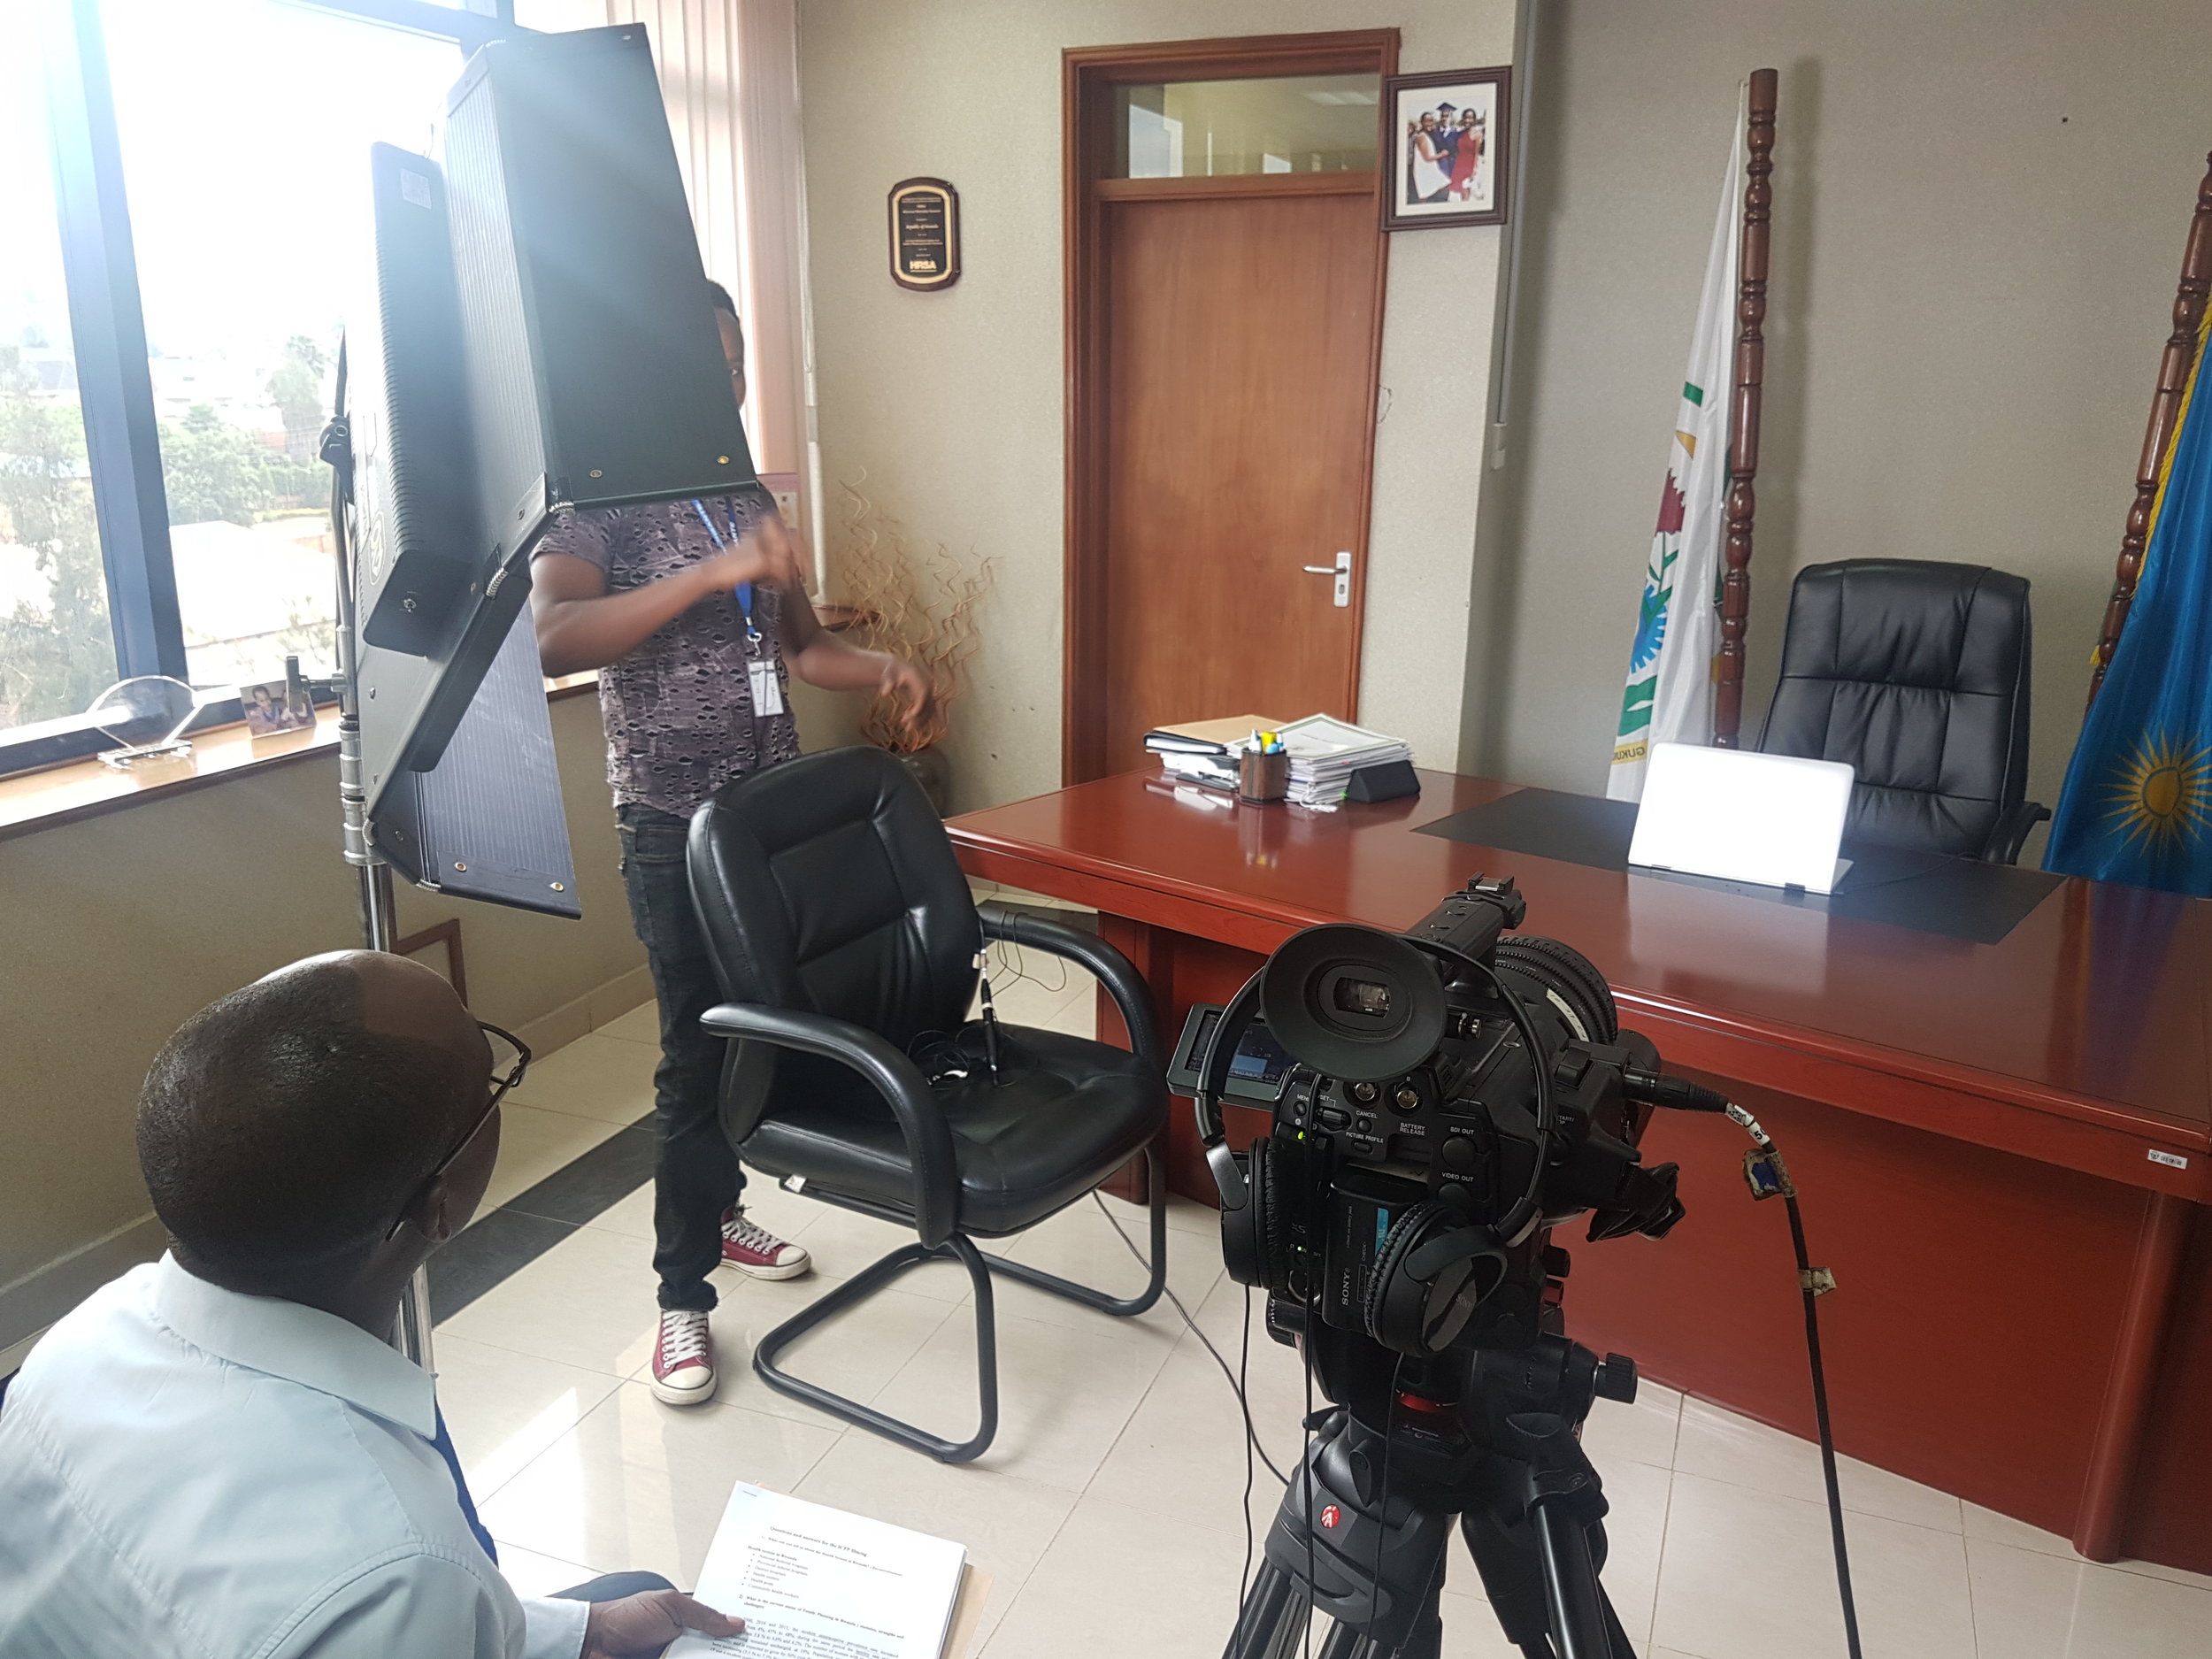 The Kino Flo Diva 401 light, Sony PMWF3, and student Hirwa Yves (behind the light) getting ready for the interview.